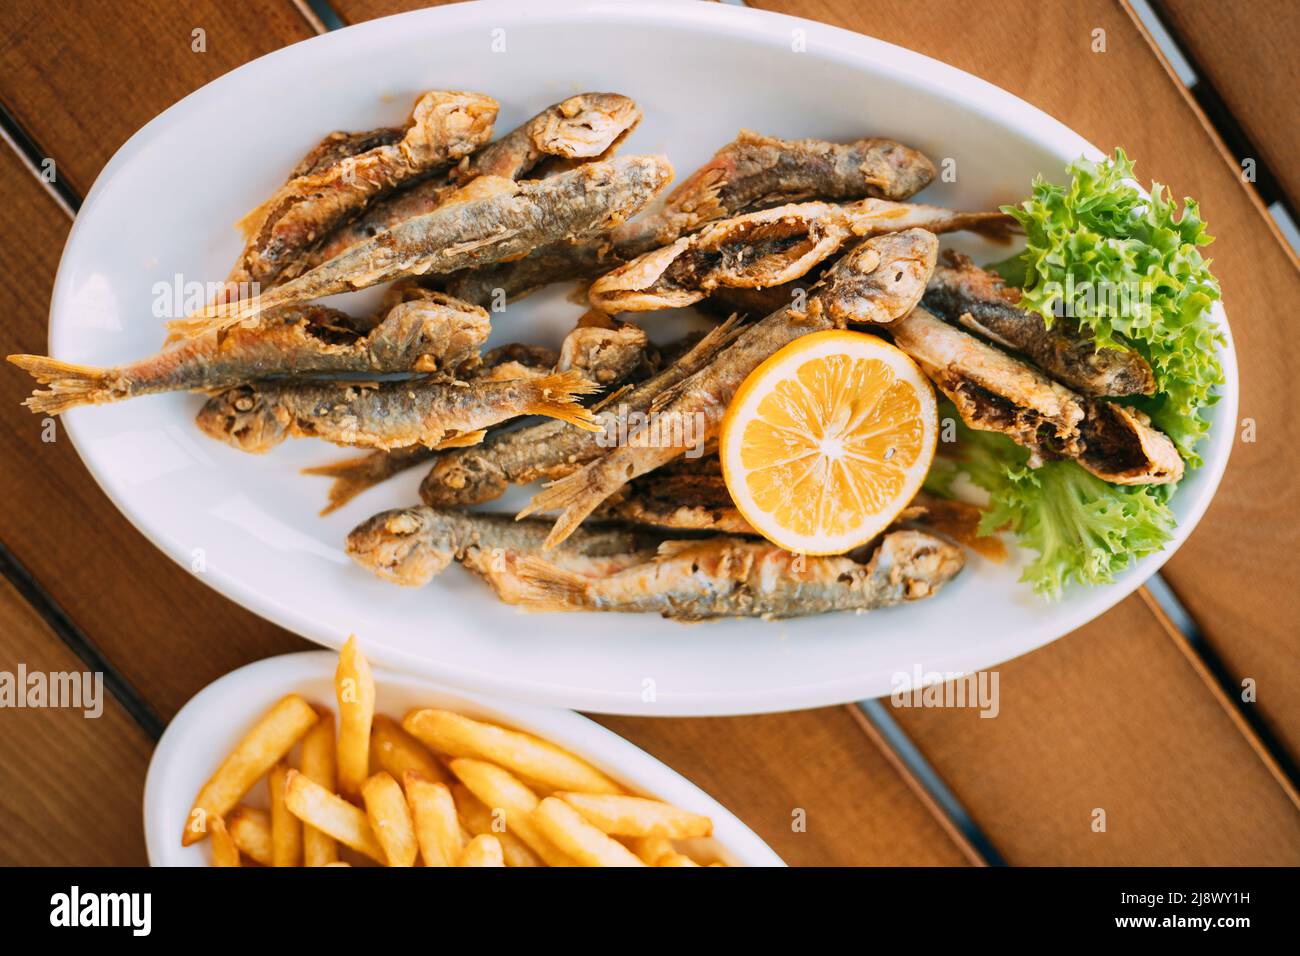 Dish Of Georgian National Cuisine: Mullet Fish With orange and french fries. fish and chips Stock Photo